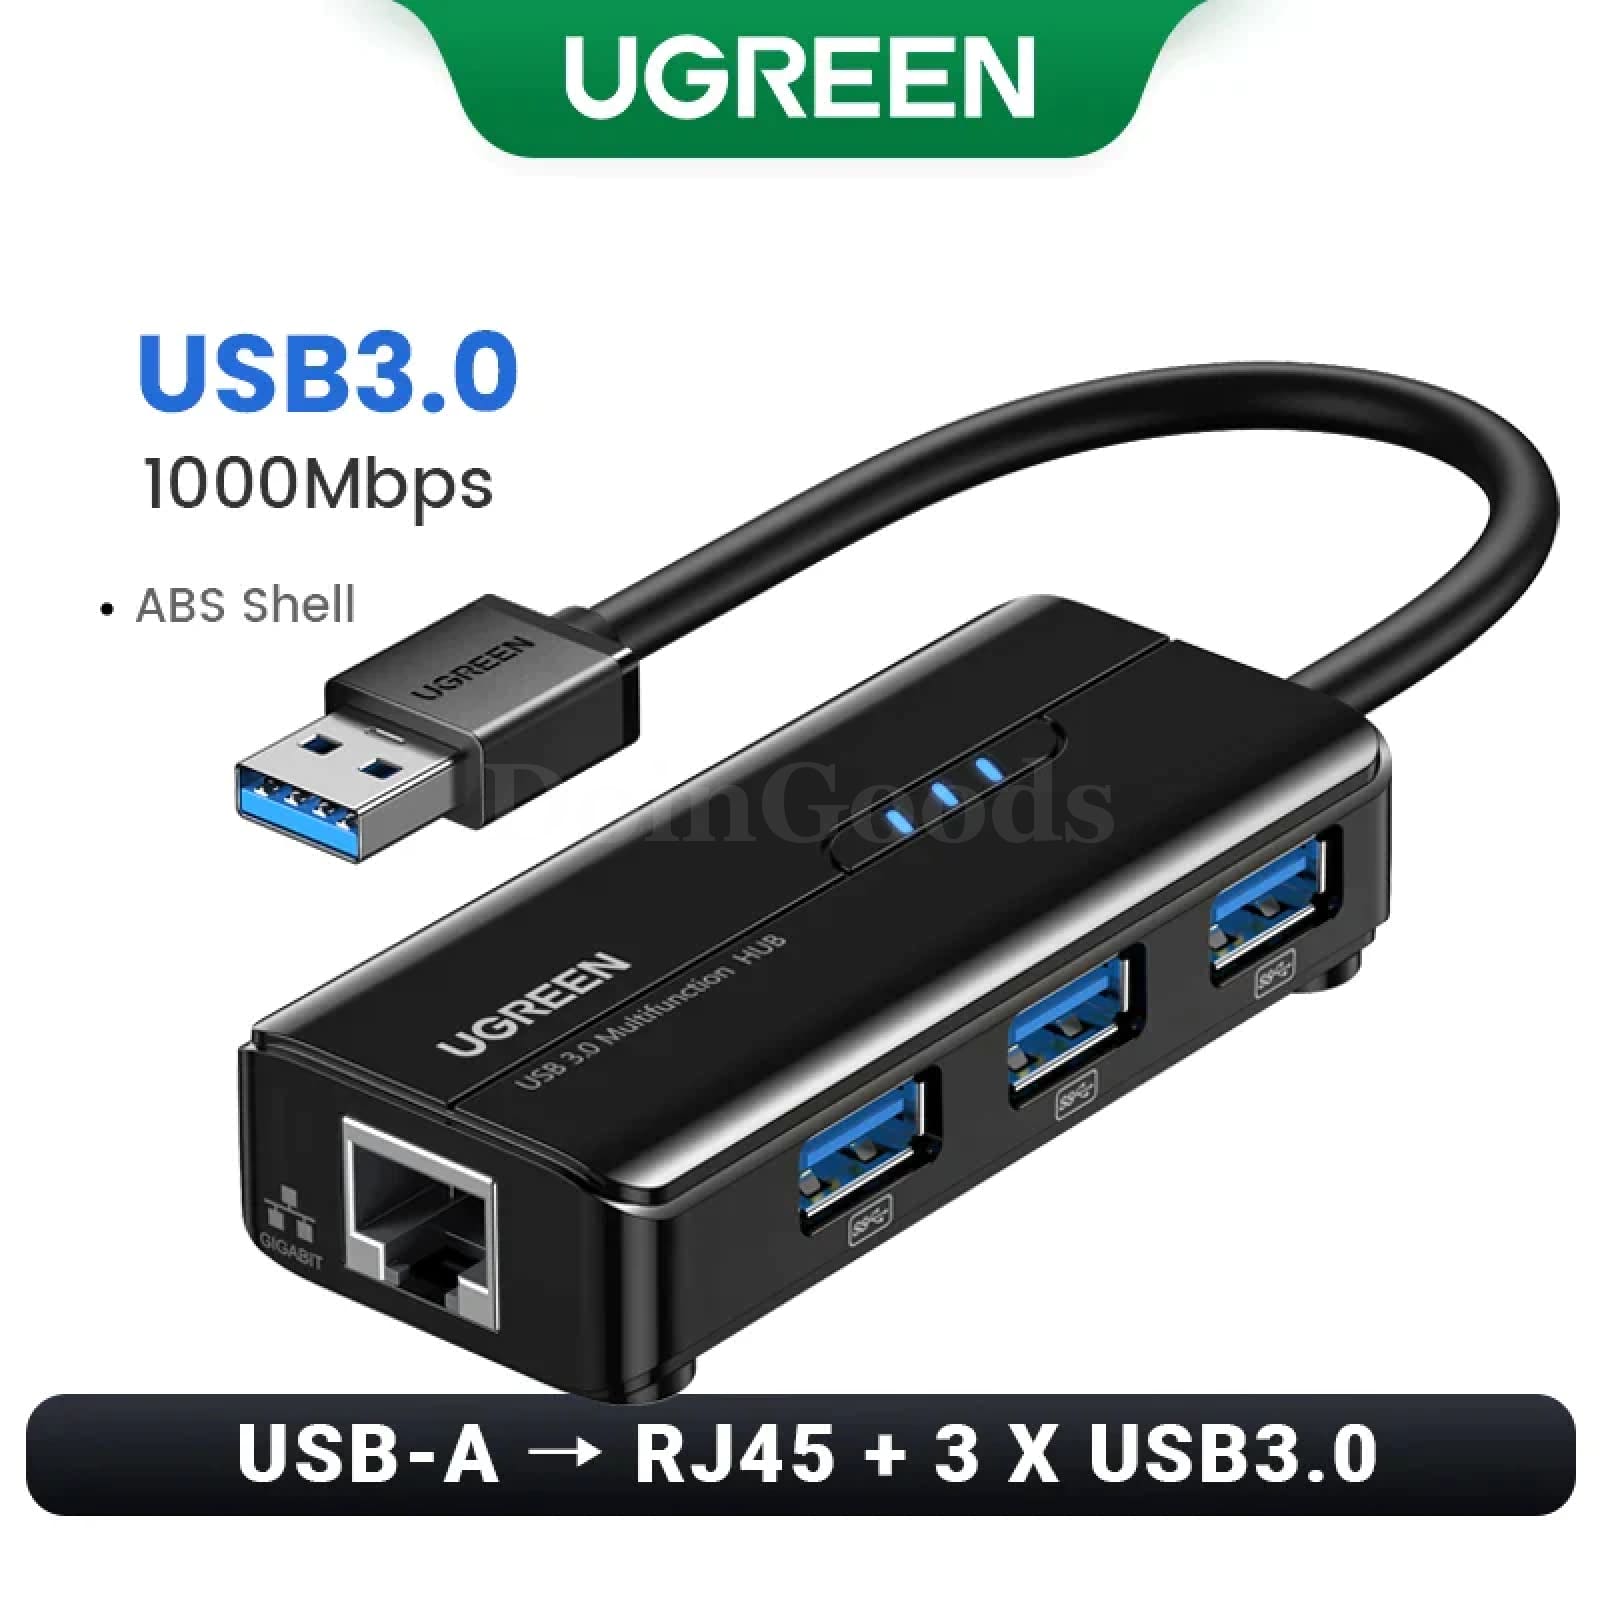 Ugreen Usb Ethernet Adapter 1000/100Mbps 3.0 Hub For Xiaomi Mi Box Macbook 1000Mbps Abs Shell 301635